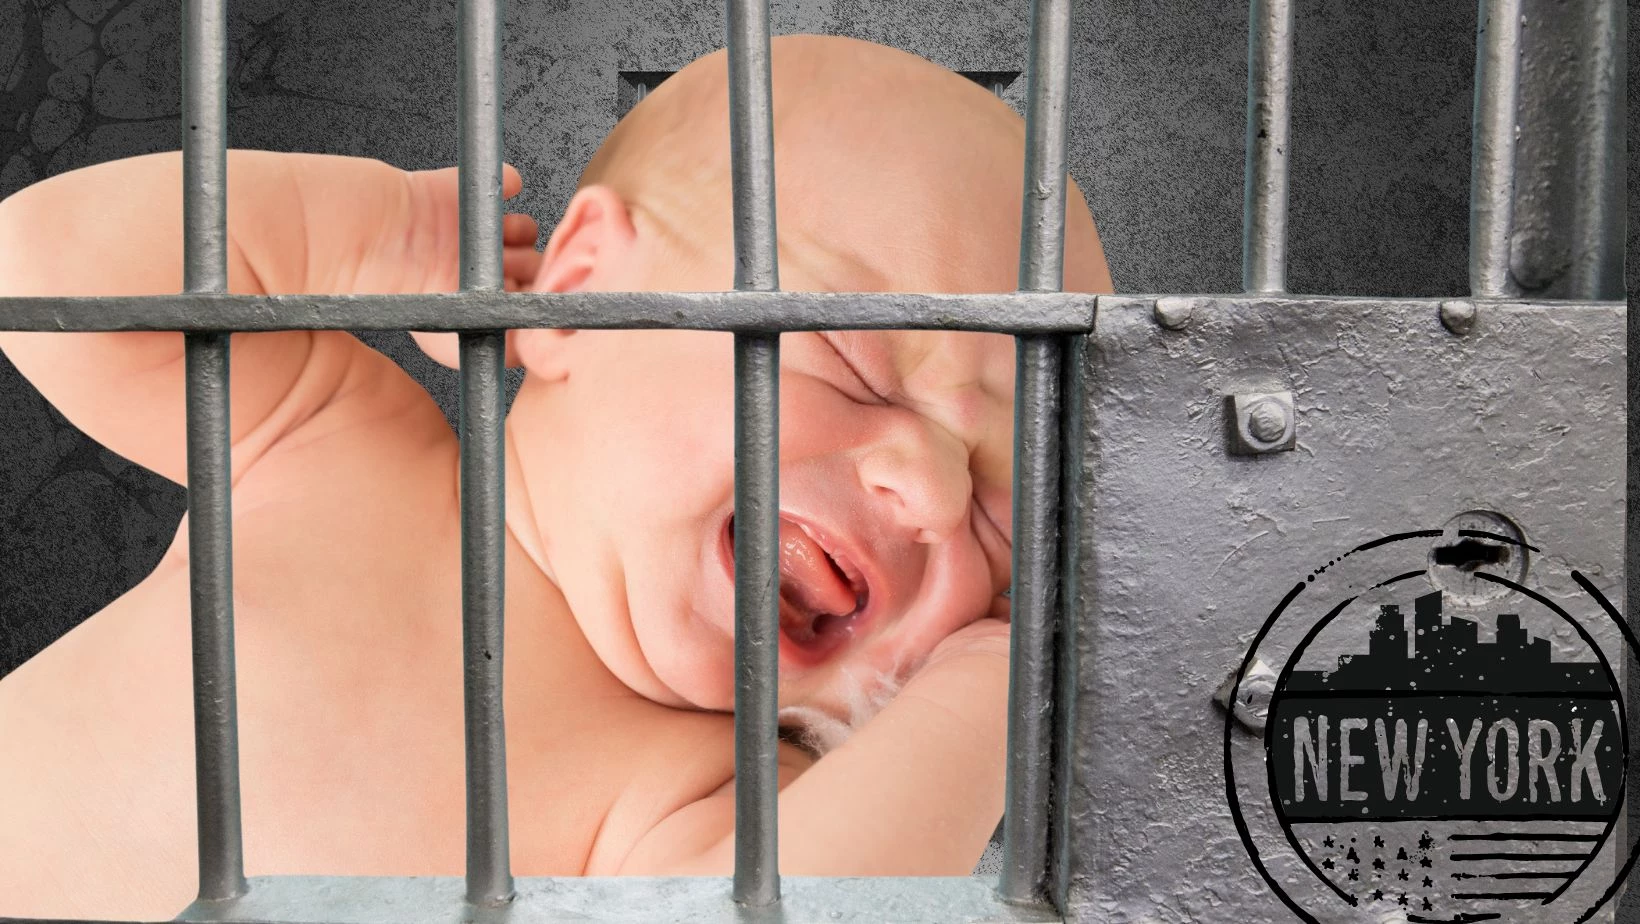 Can You Keep A Baby Behind Bars In New York State? image